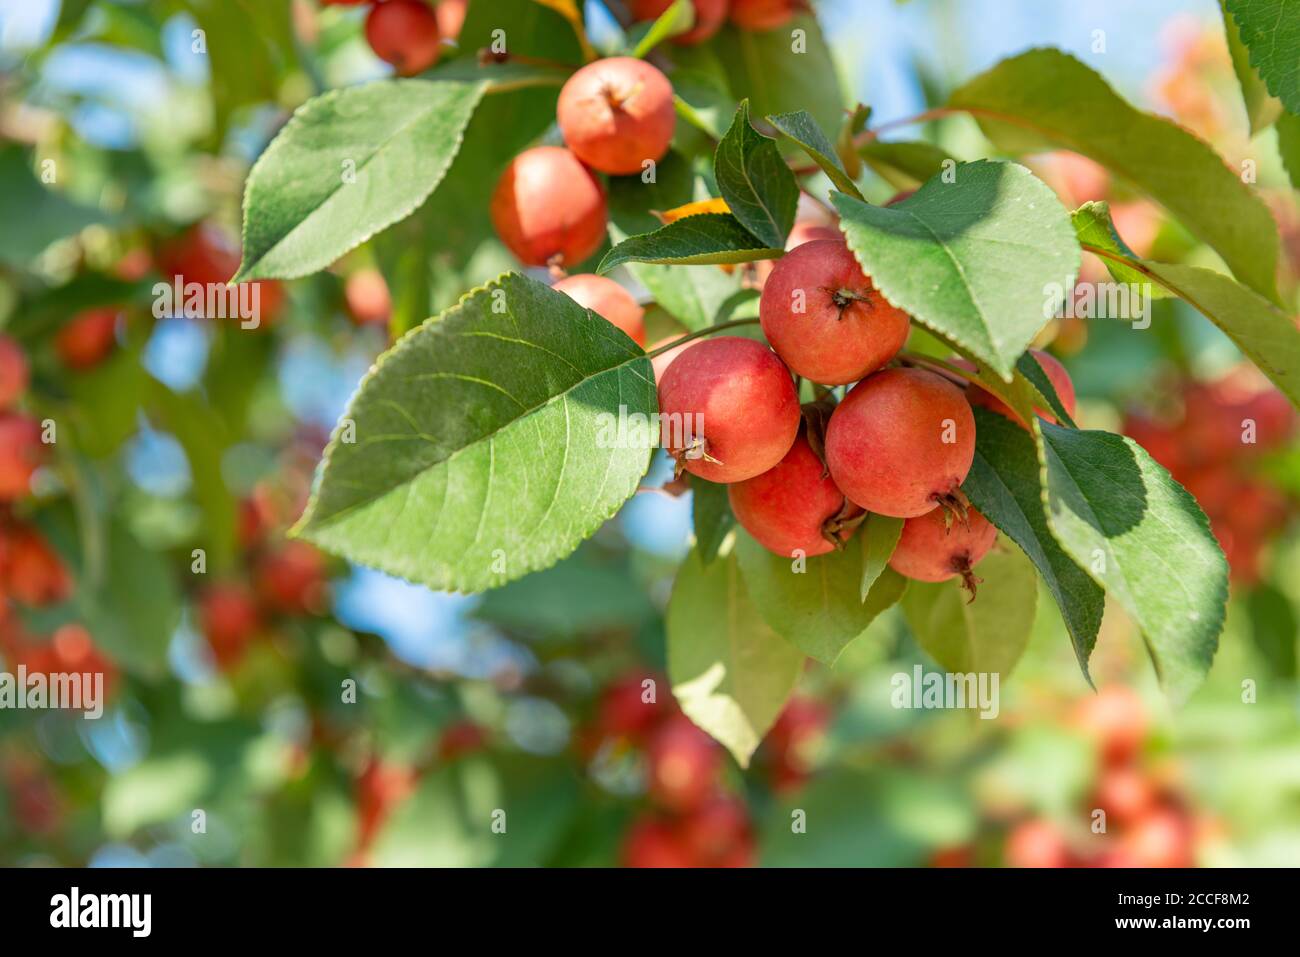 Ornamental apple, hanging in the tree, red fruits, Malus prunifolia, Stock Photo